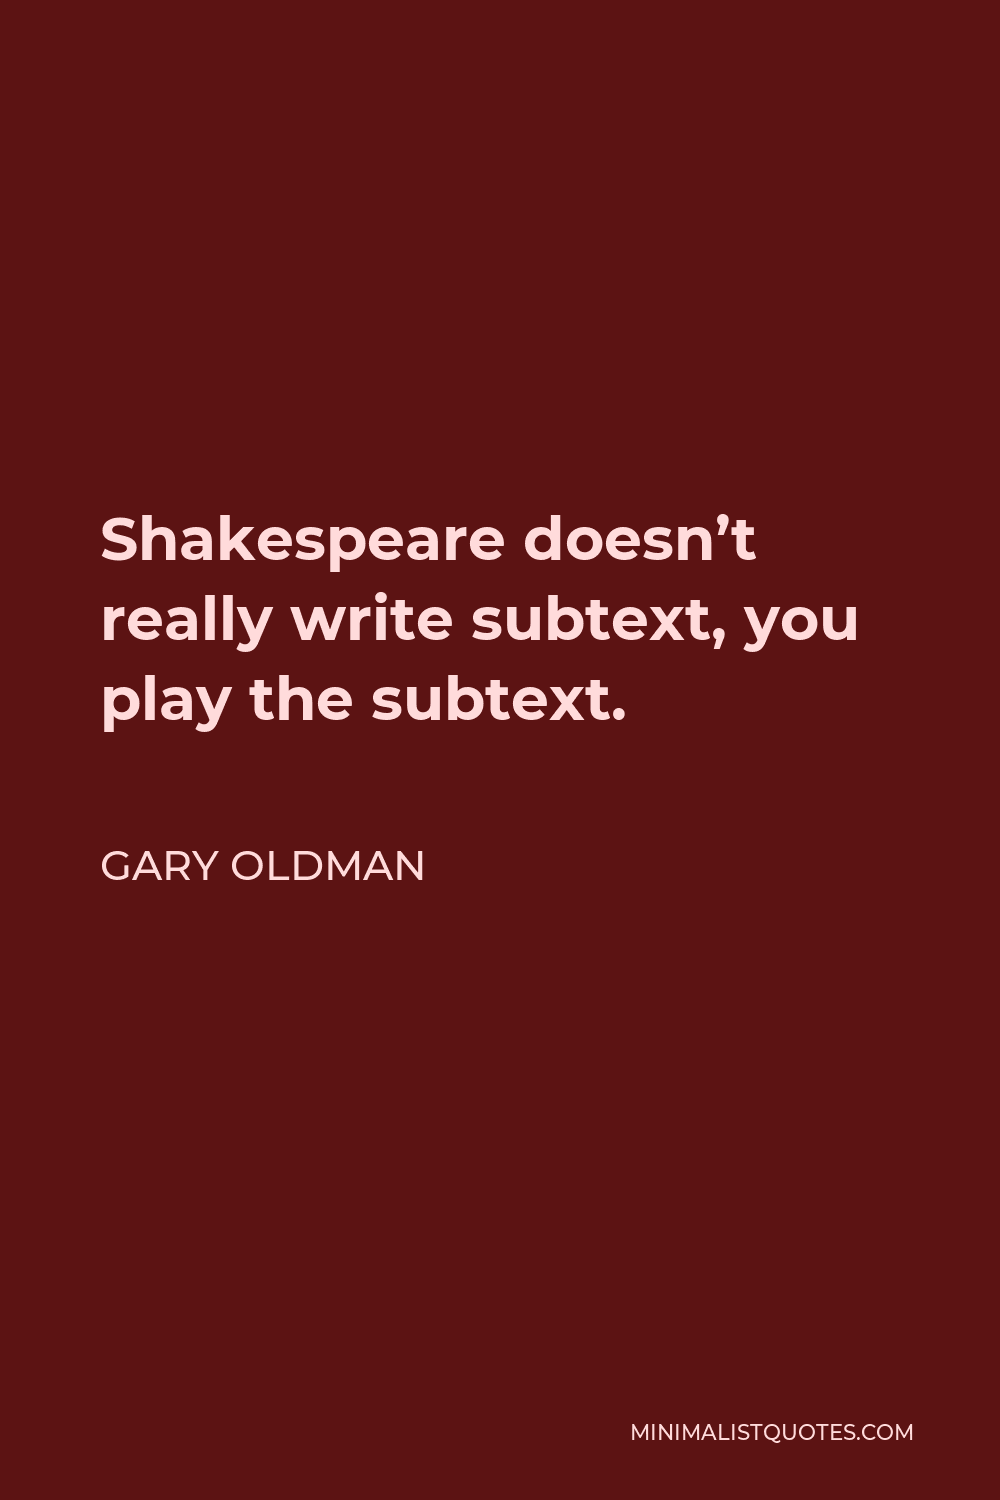 Gary Oldman Quote - Shakespeare doesn’t really write subtext, you play the subtext.